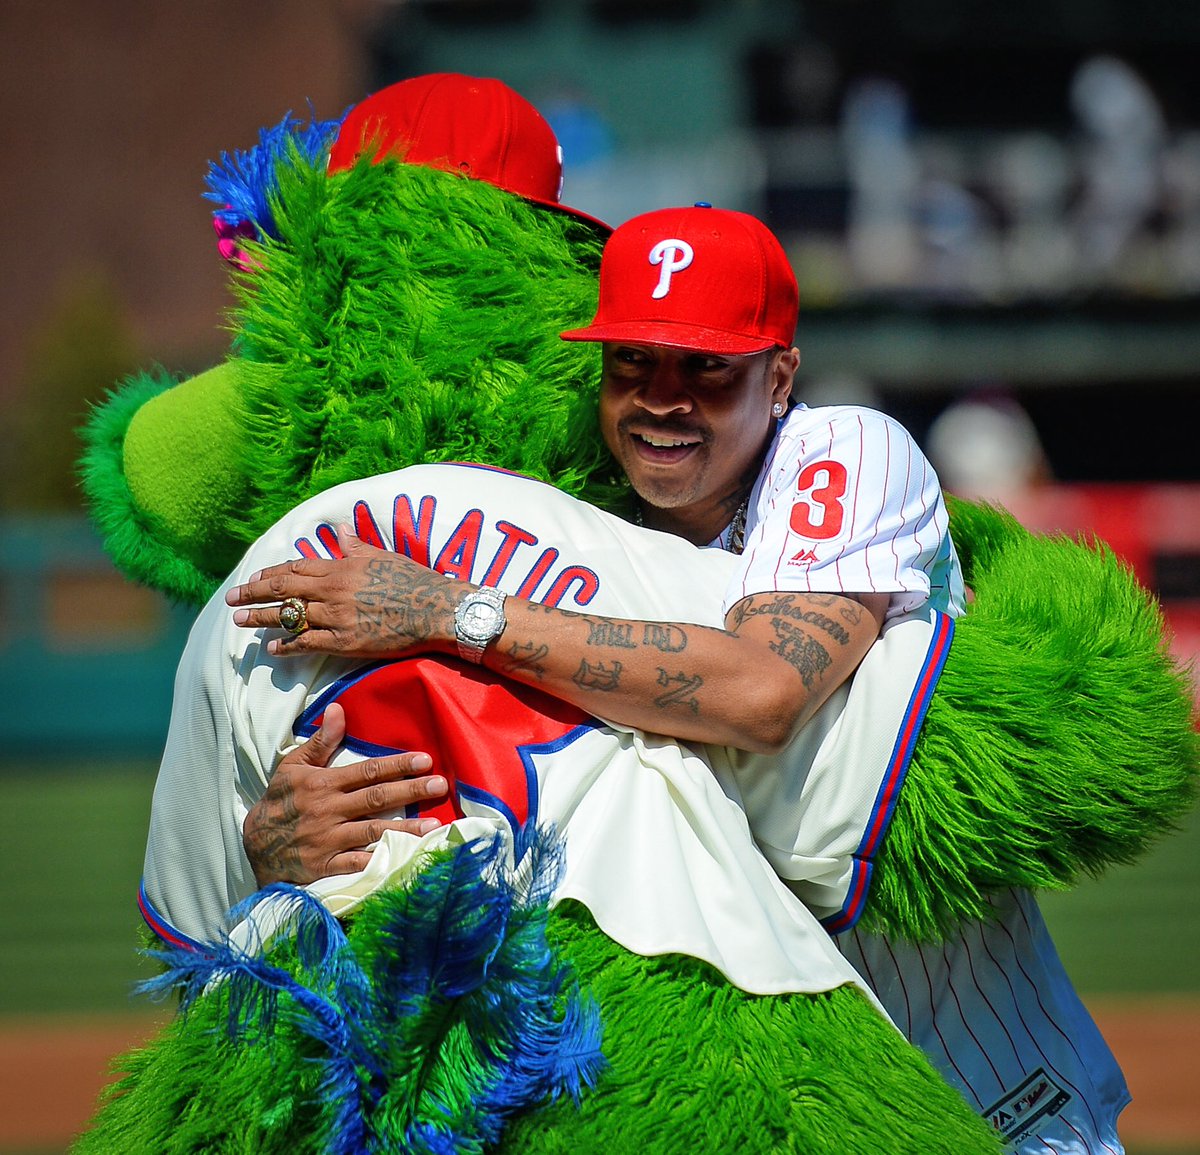 The Phillie Phanatic Will be Allowed at Citizens Bank Park This Summer